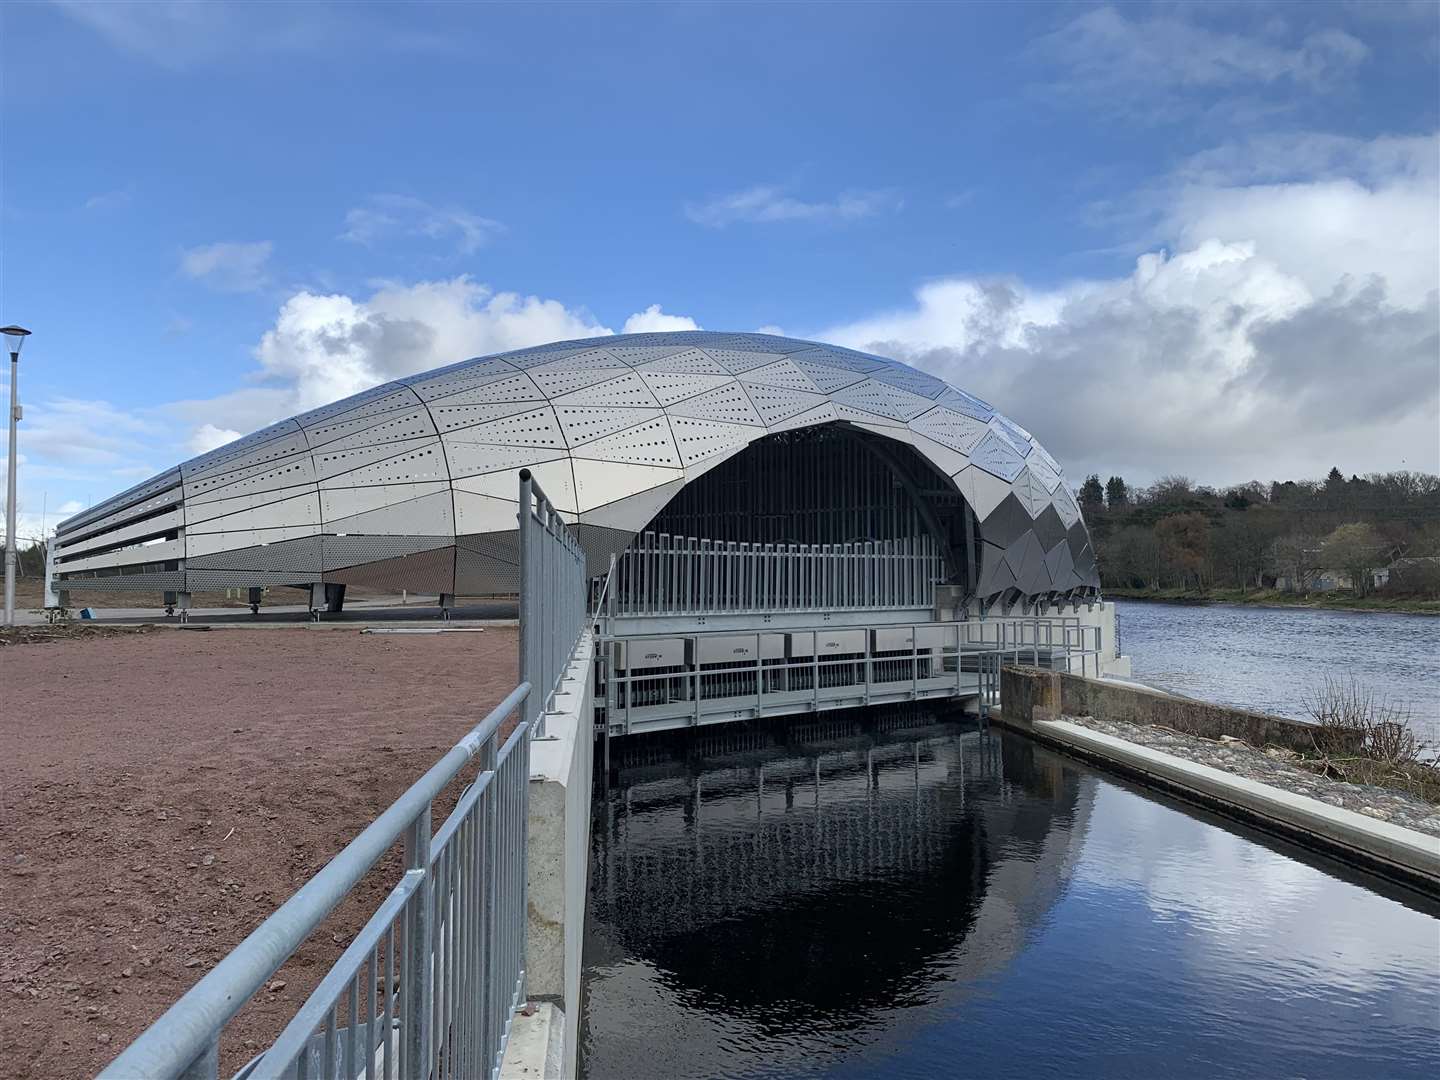 The award-winning Hydro Ness in Inverness has been shortlisted for a design award.